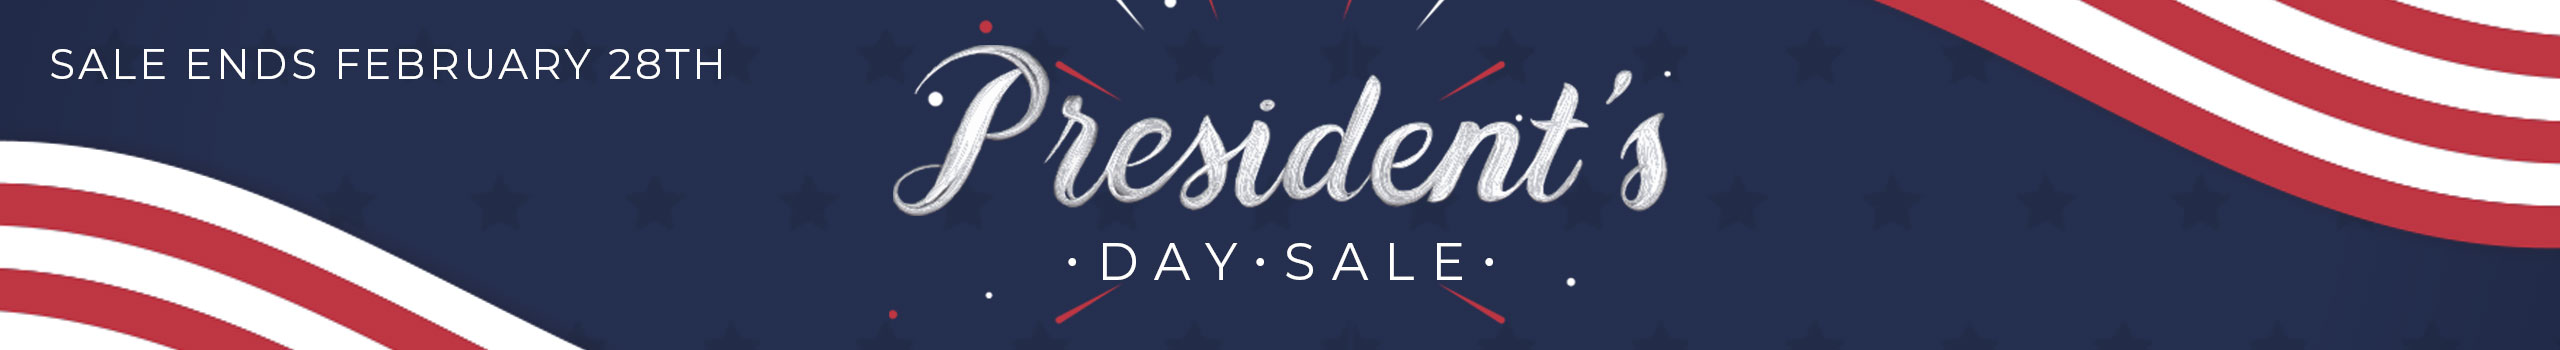 President's Day Sale Ends February 28th